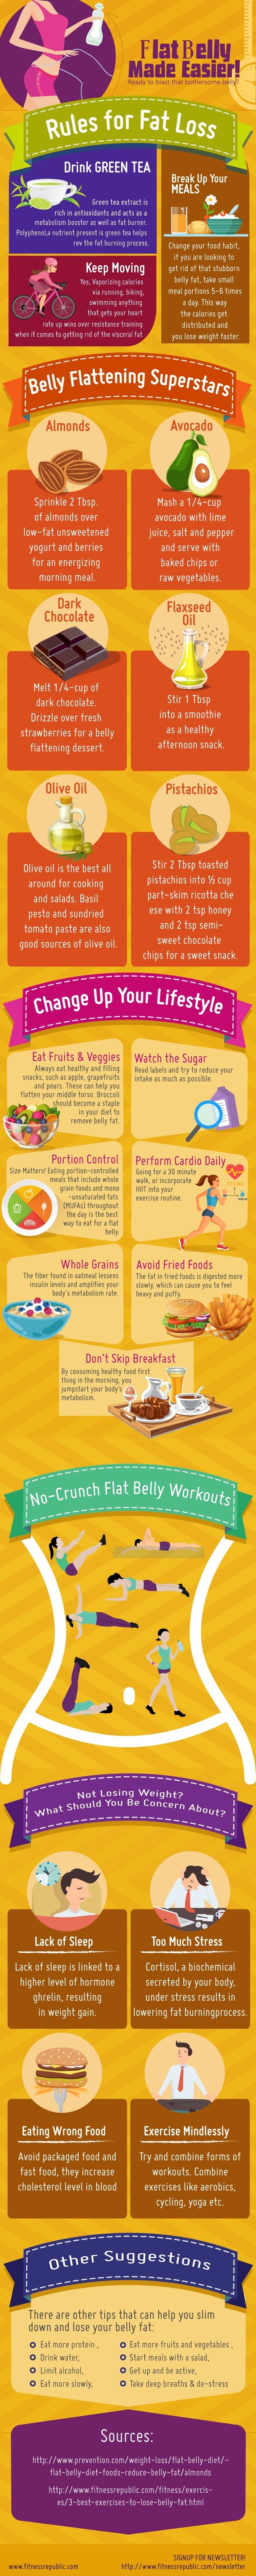 Infographic: How To Attain A Flat Belly - LifeHack